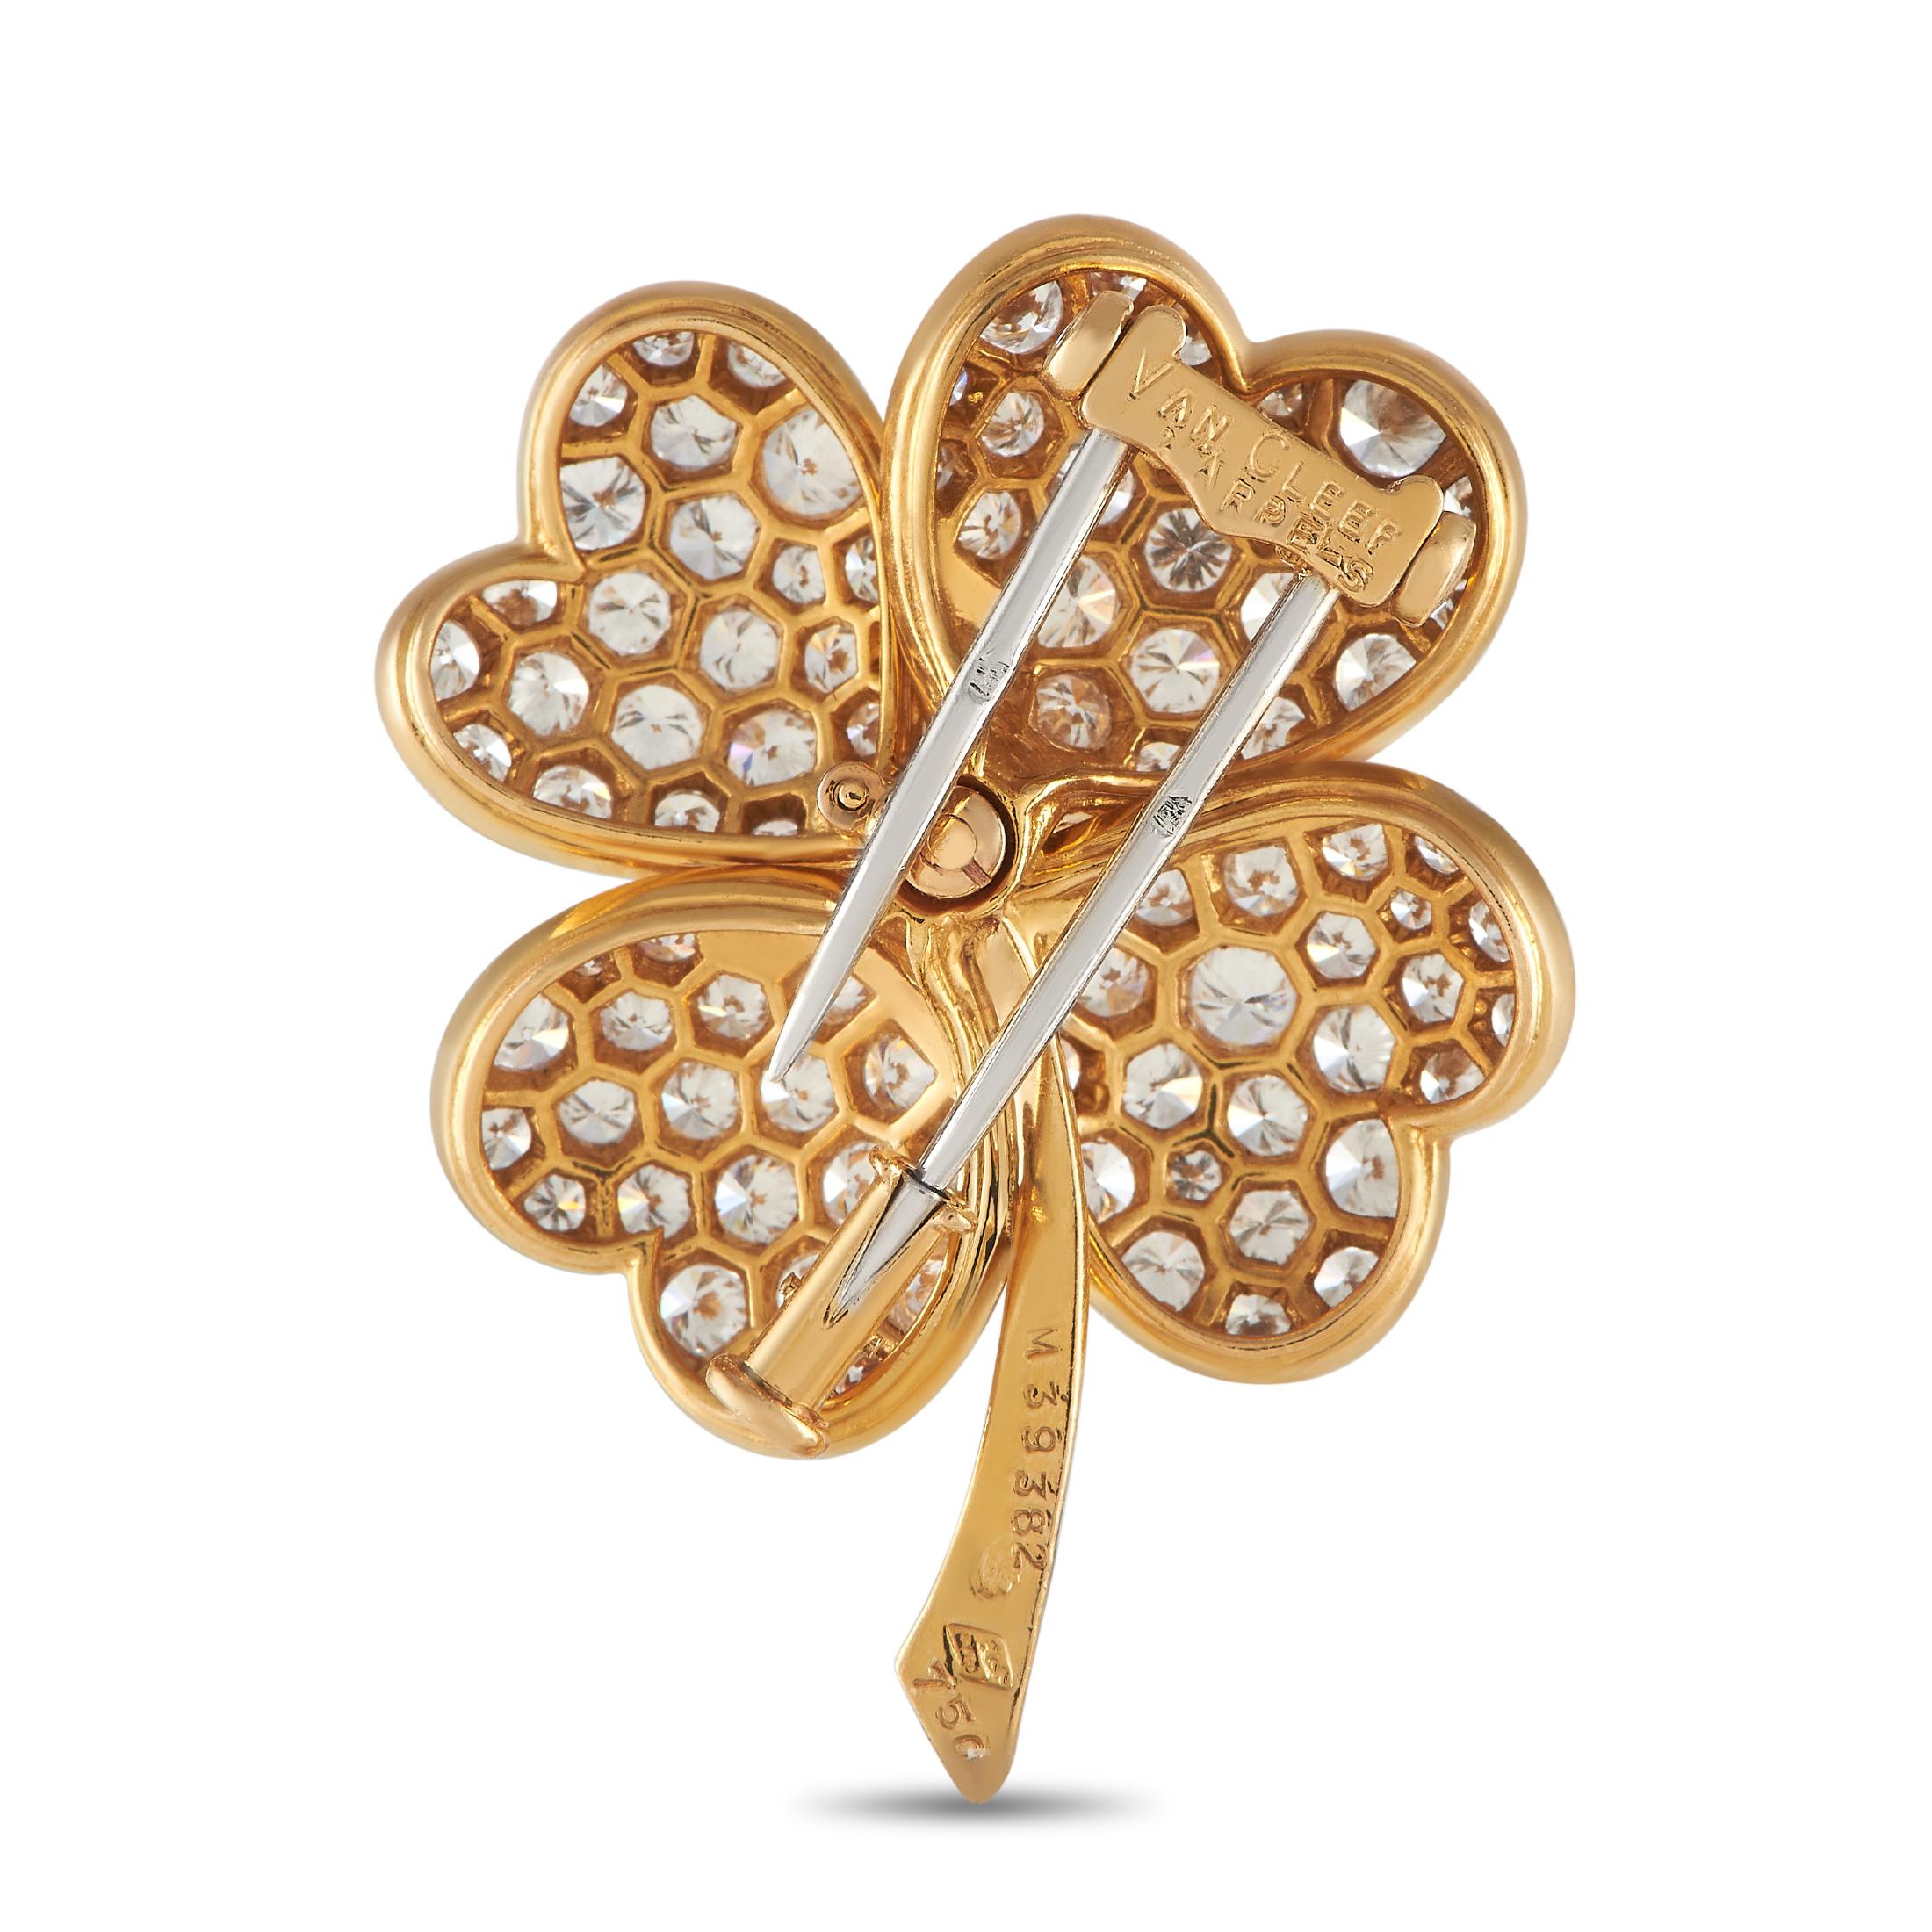 A pendant and a brooch in one, this medium sized Van Cleef & Arpels piece will undoubtedly become one of your favorites. It is crafted in 18K yellow gold with a sculpted cosmos flower motif. Its four heart-shaped petals are peppered with EF/VVS-1